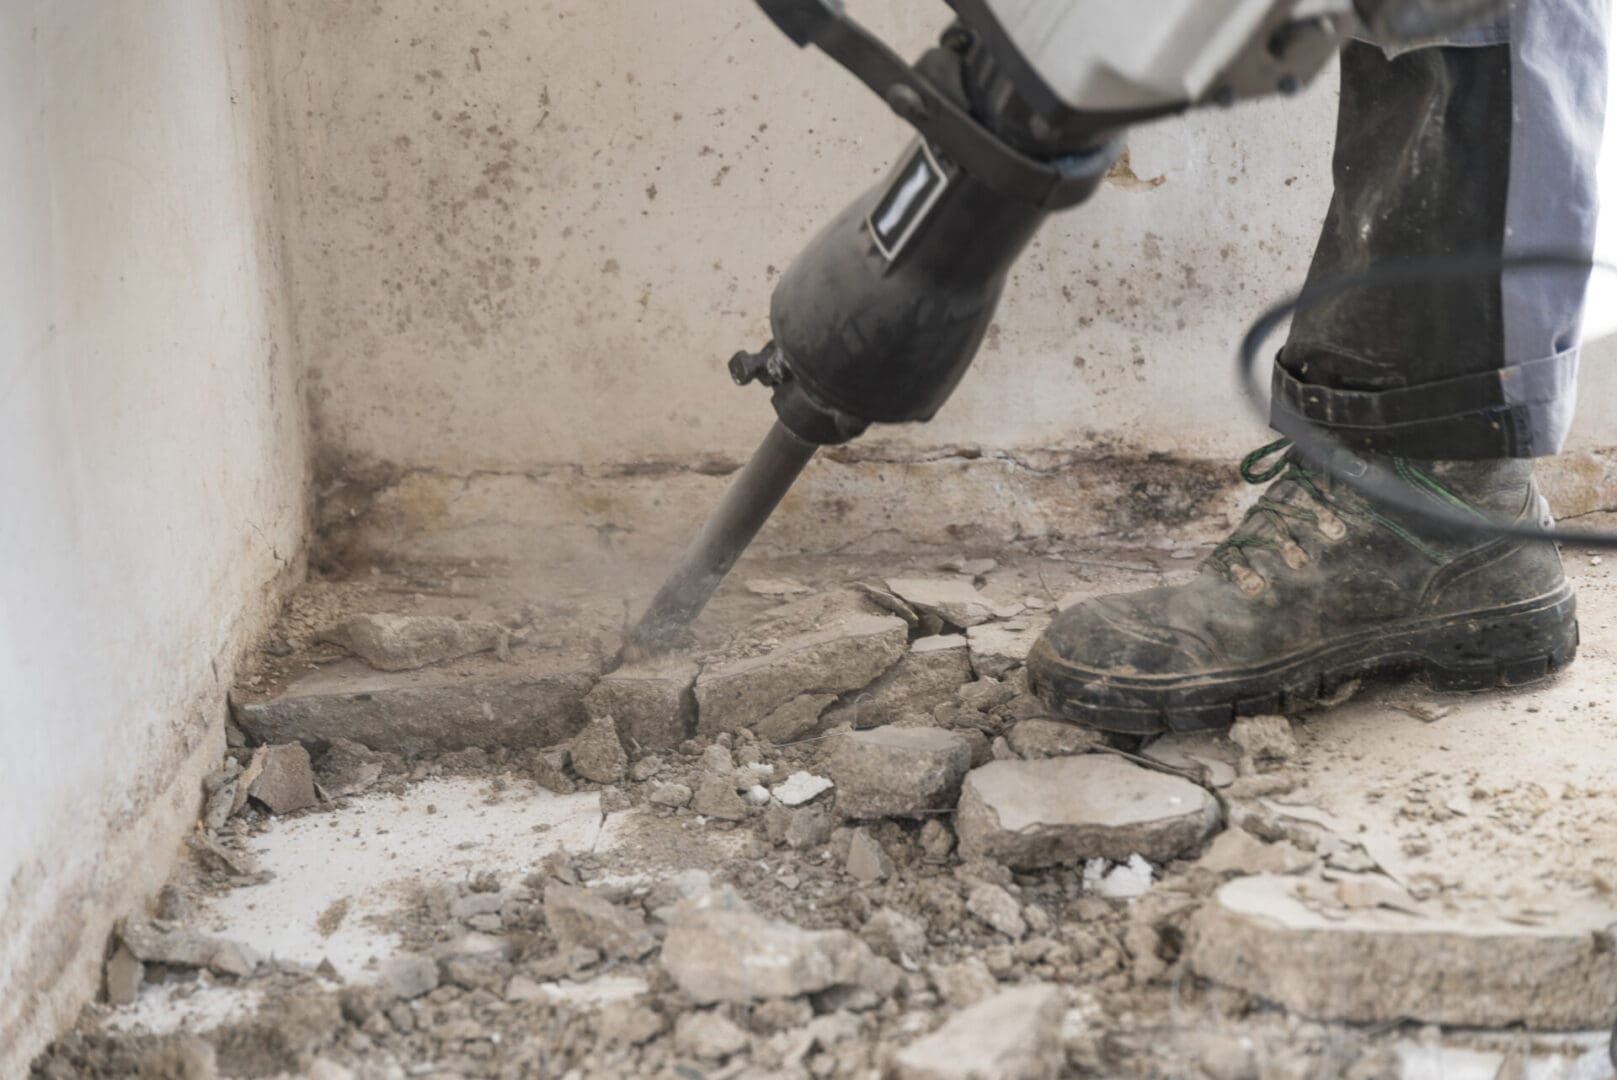 A person using an electric hammer to break up concrete.